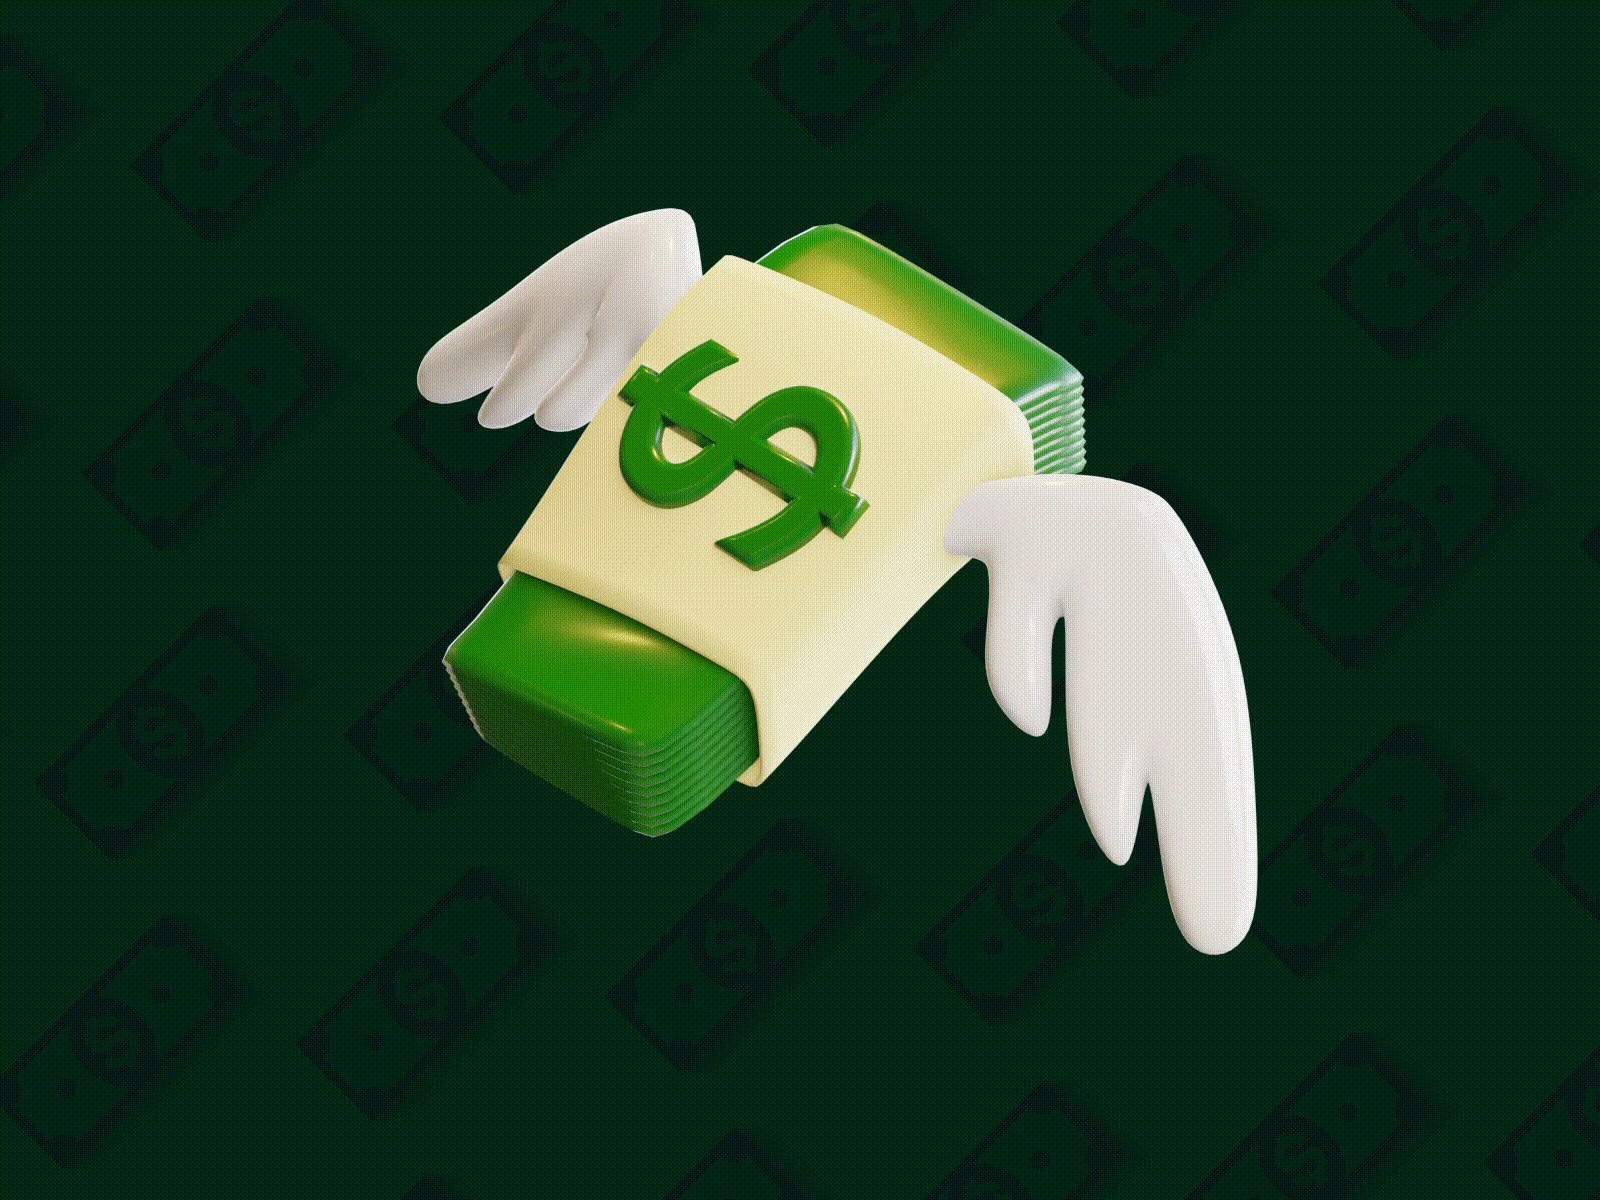 Flying Money - 3D Icon Animation 3d 3d animation 3d design 3d finance 3d icon 3d icon animation dollar stack icon finance icon money with wings